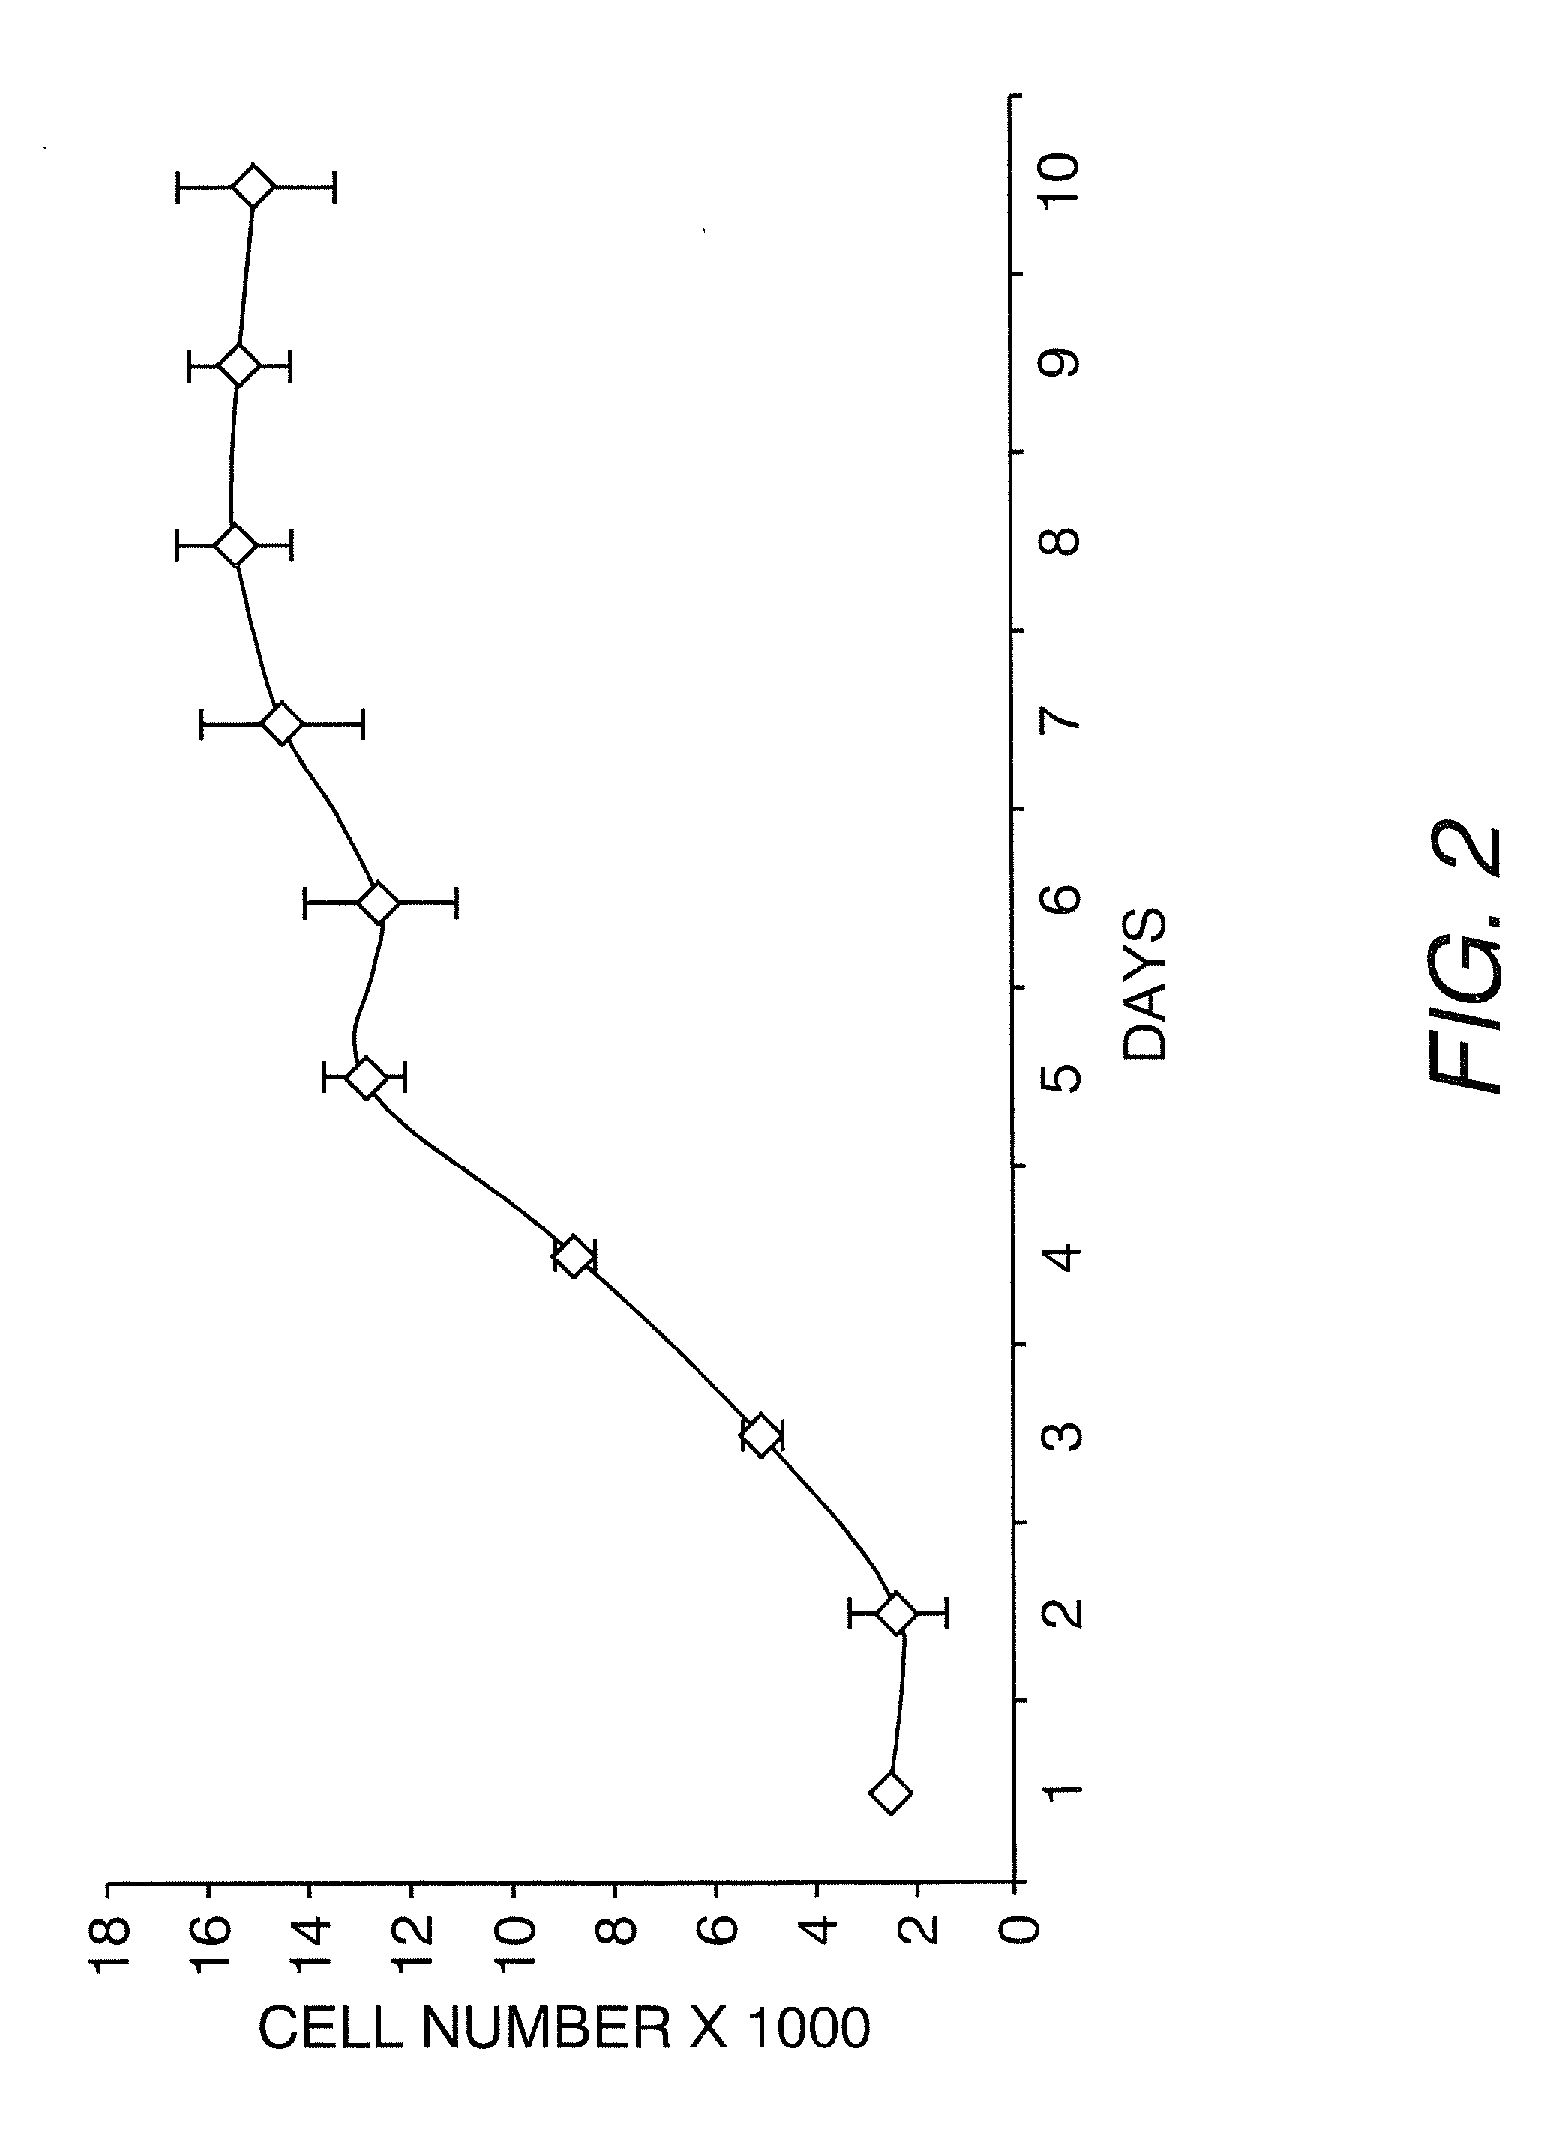 Stem cells from urine and methods for using the same